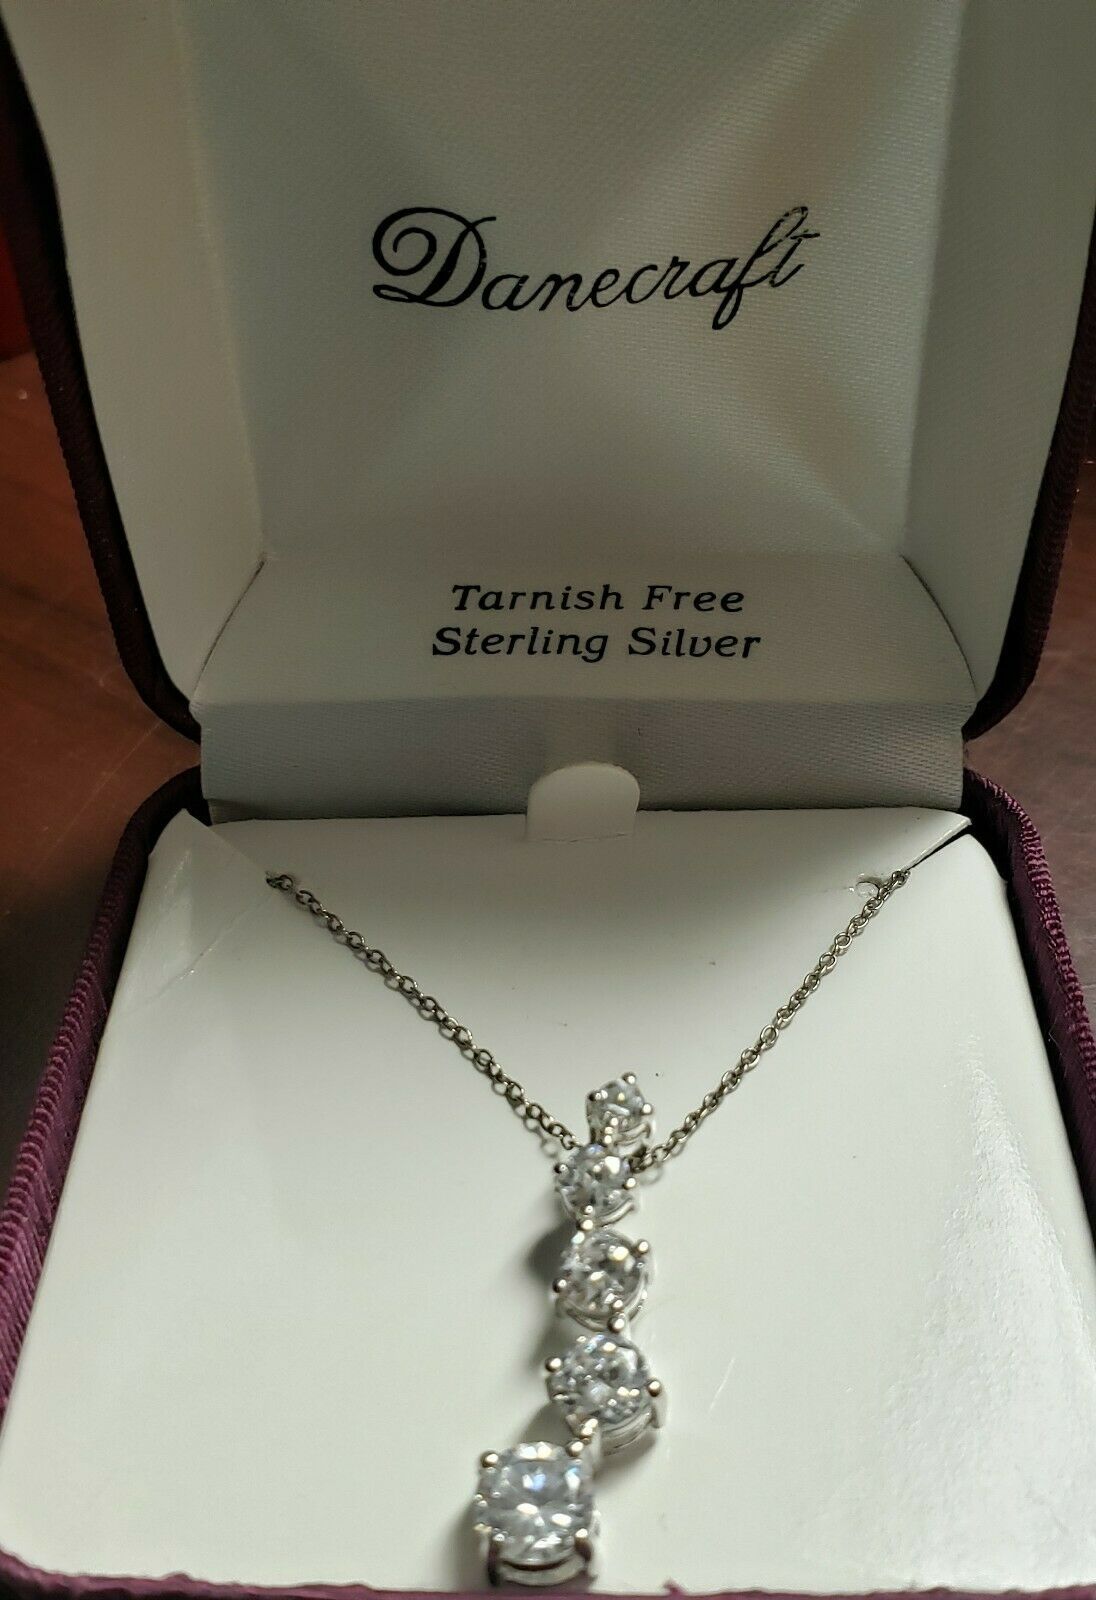 Danecraft Sterling Silver Swerved Drop CZ Stones Pendant 18 in. Chain New in Box - $55.13